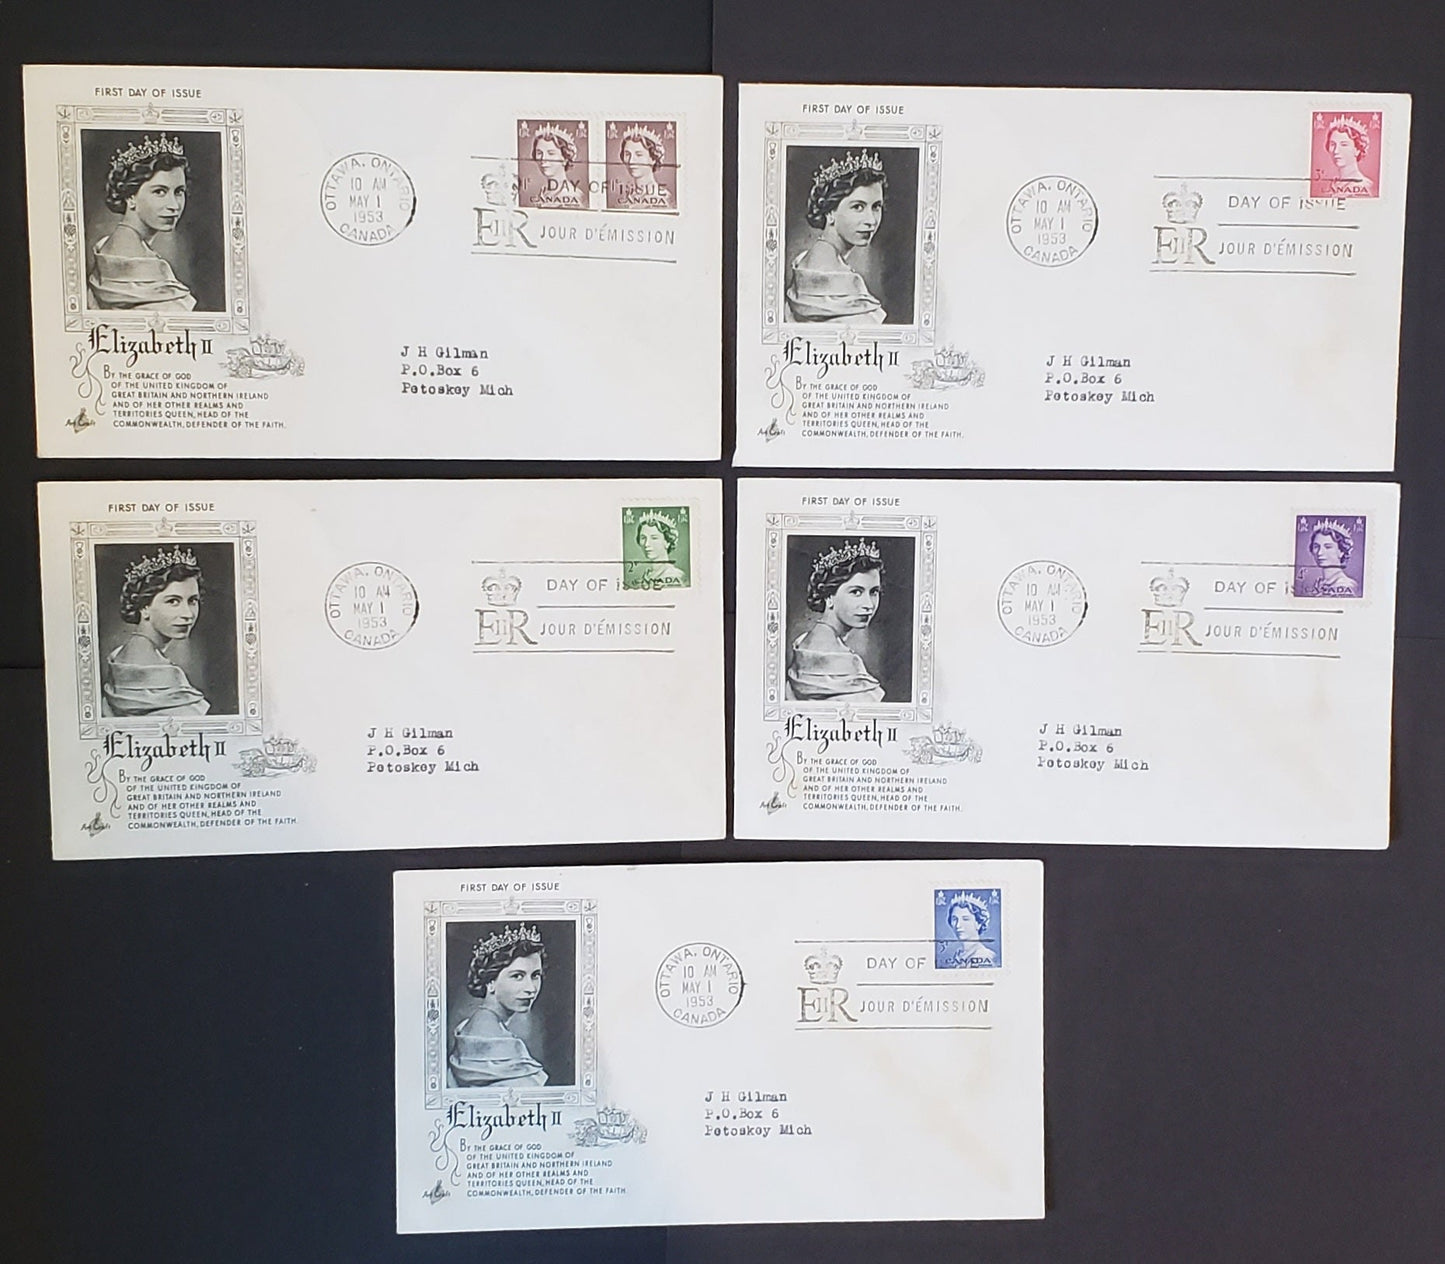 Lot 7 Canada #325-329 1c-5c Violet Brown-Ultramarine Queen Elizabeth II 1953 Karsh Issue, 5 Artcraft E Cachets First Day Covers Franked With Singles & Pair, All Addressed, Cat. Value $40